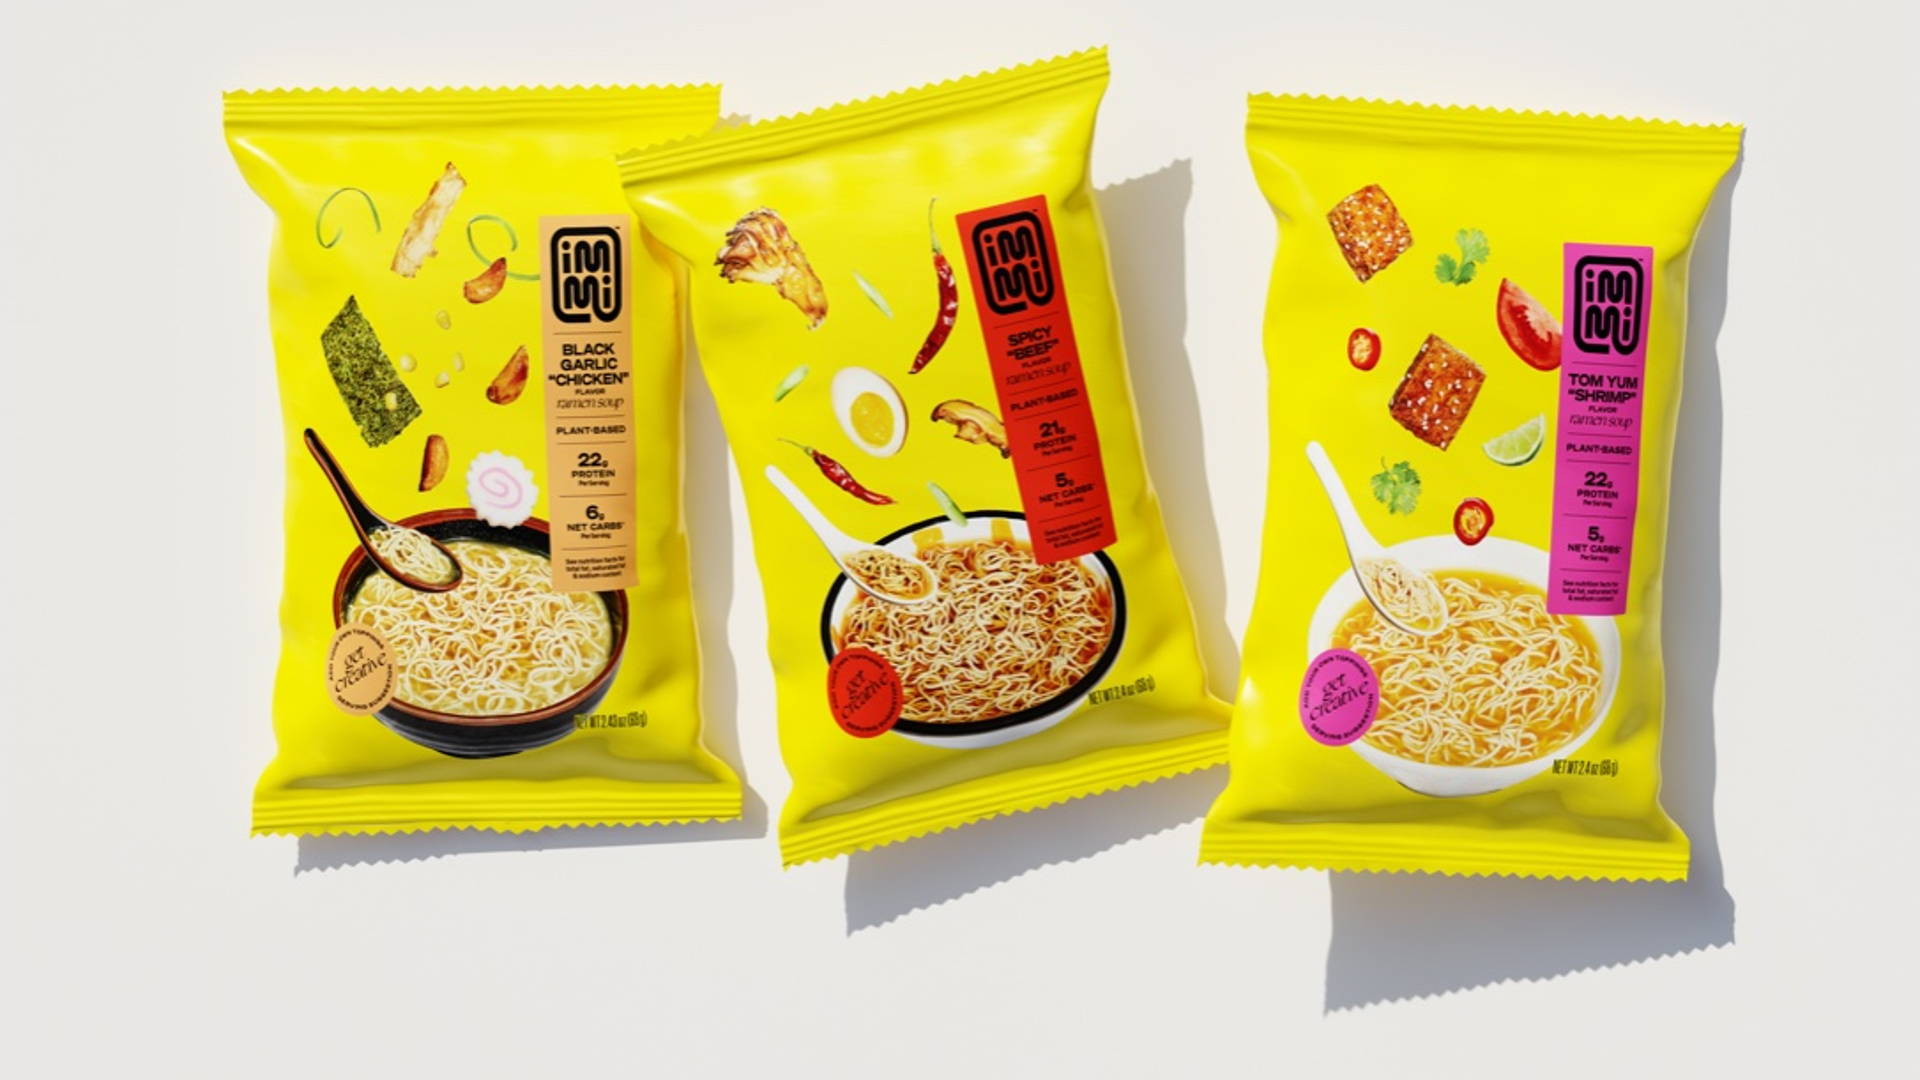 Featured image for Healthy Ramen Brand immi Takes Cues From Traditional Ramen Packaging Yet With A Modern Take